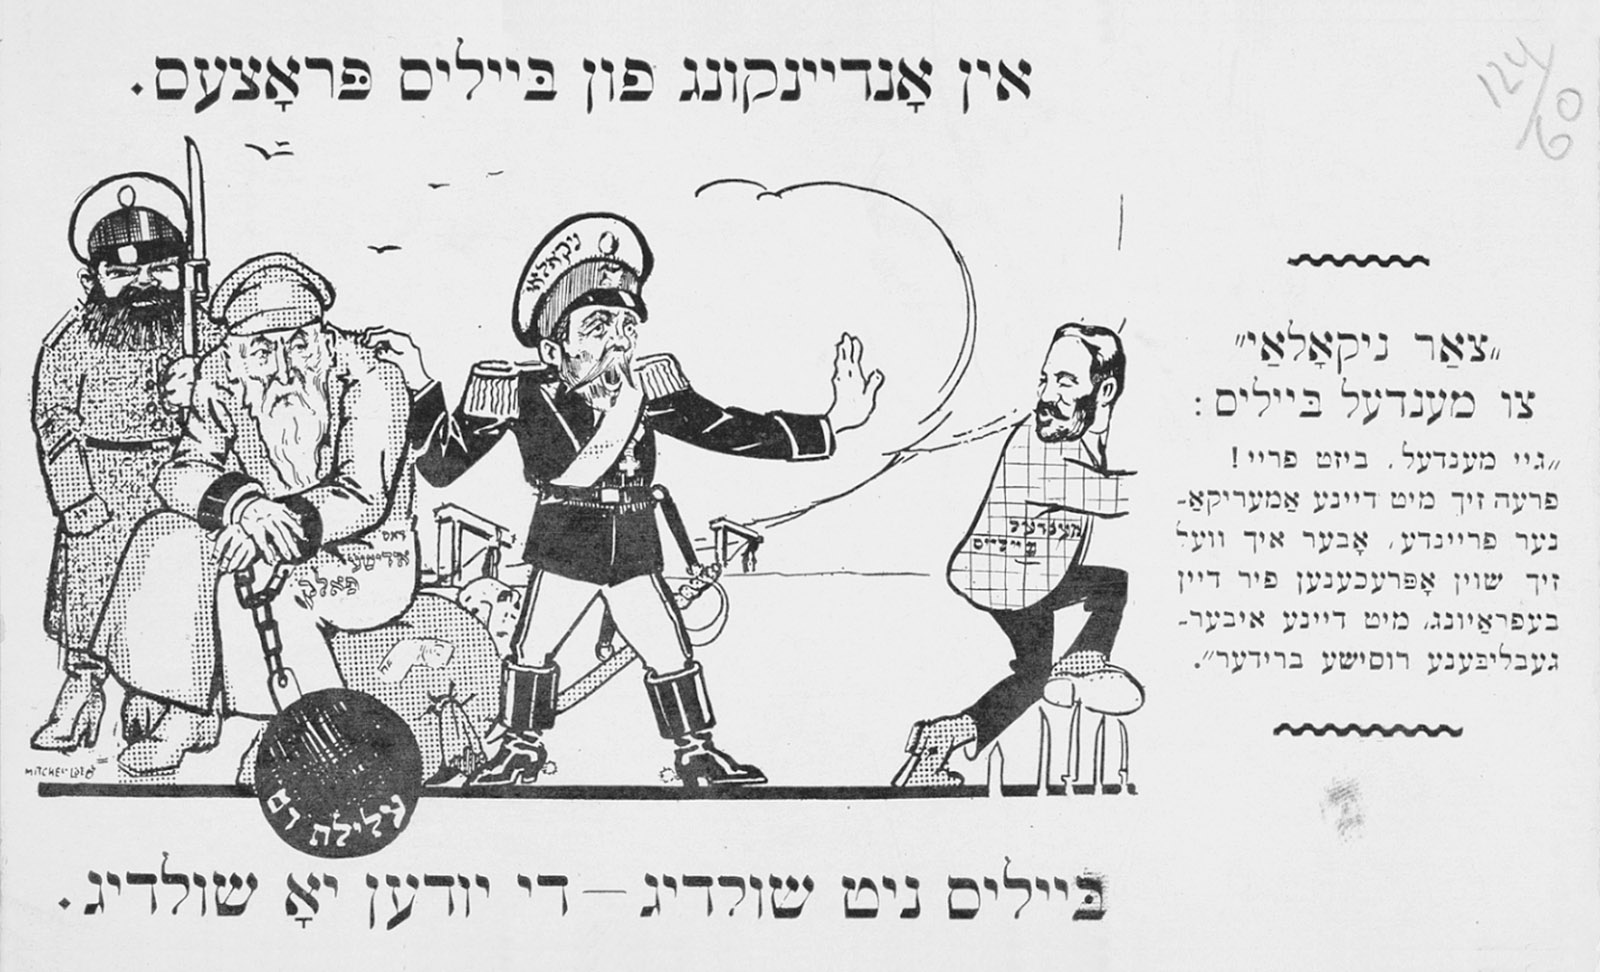 A postcard in Yiddish commemorating the verdict in the 1913 trial of Mendel Beilis, a Jew charged with the ritual religious killing of a Christian child in Kiev. The jury acquitted Beilis but judged that the crime had occurred. Tsar Nicholas II (center) is bidding Beilis to go free—‘but I won’t waste any time in getting even for your acquittal with your Russian brothers you’ve left behind.’ The seated old man depicts the ‘Jewish people’; the ball and chain is labeled ‘blood libel.’ A conference on the blood libel will be presented by the YIVO Institute for Jewish Research and Center for Jewish History in New York on October 9.